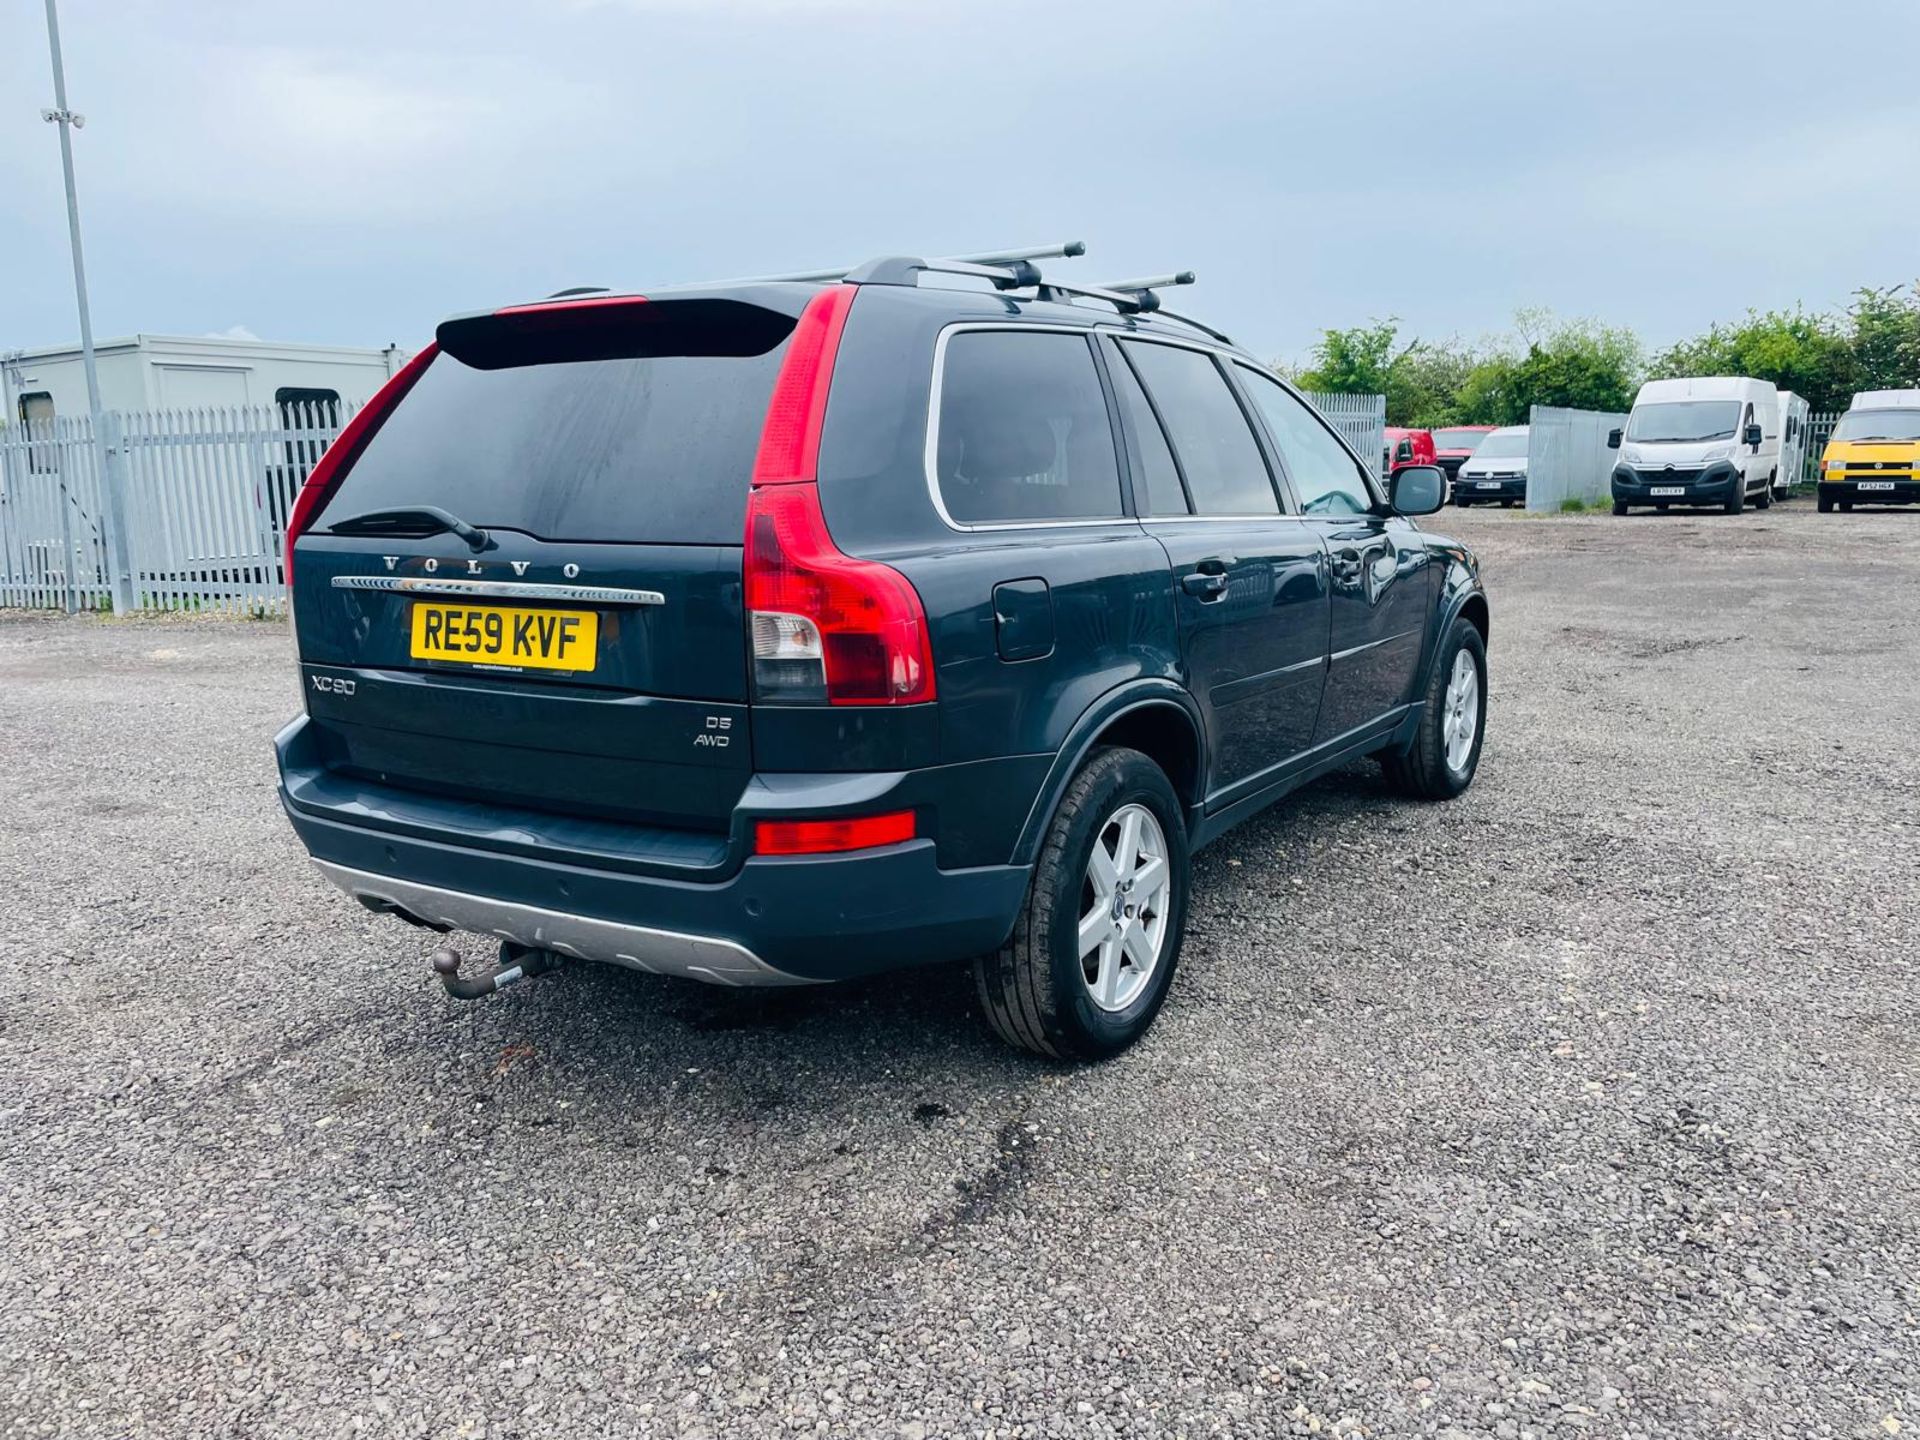 Volvo XC90 D5 185 Active 2.4 2009 '59 Reg' -7 Seats-Air Conditioning-Power Mirrors-Automatic-No Vat - Image 9 of 34